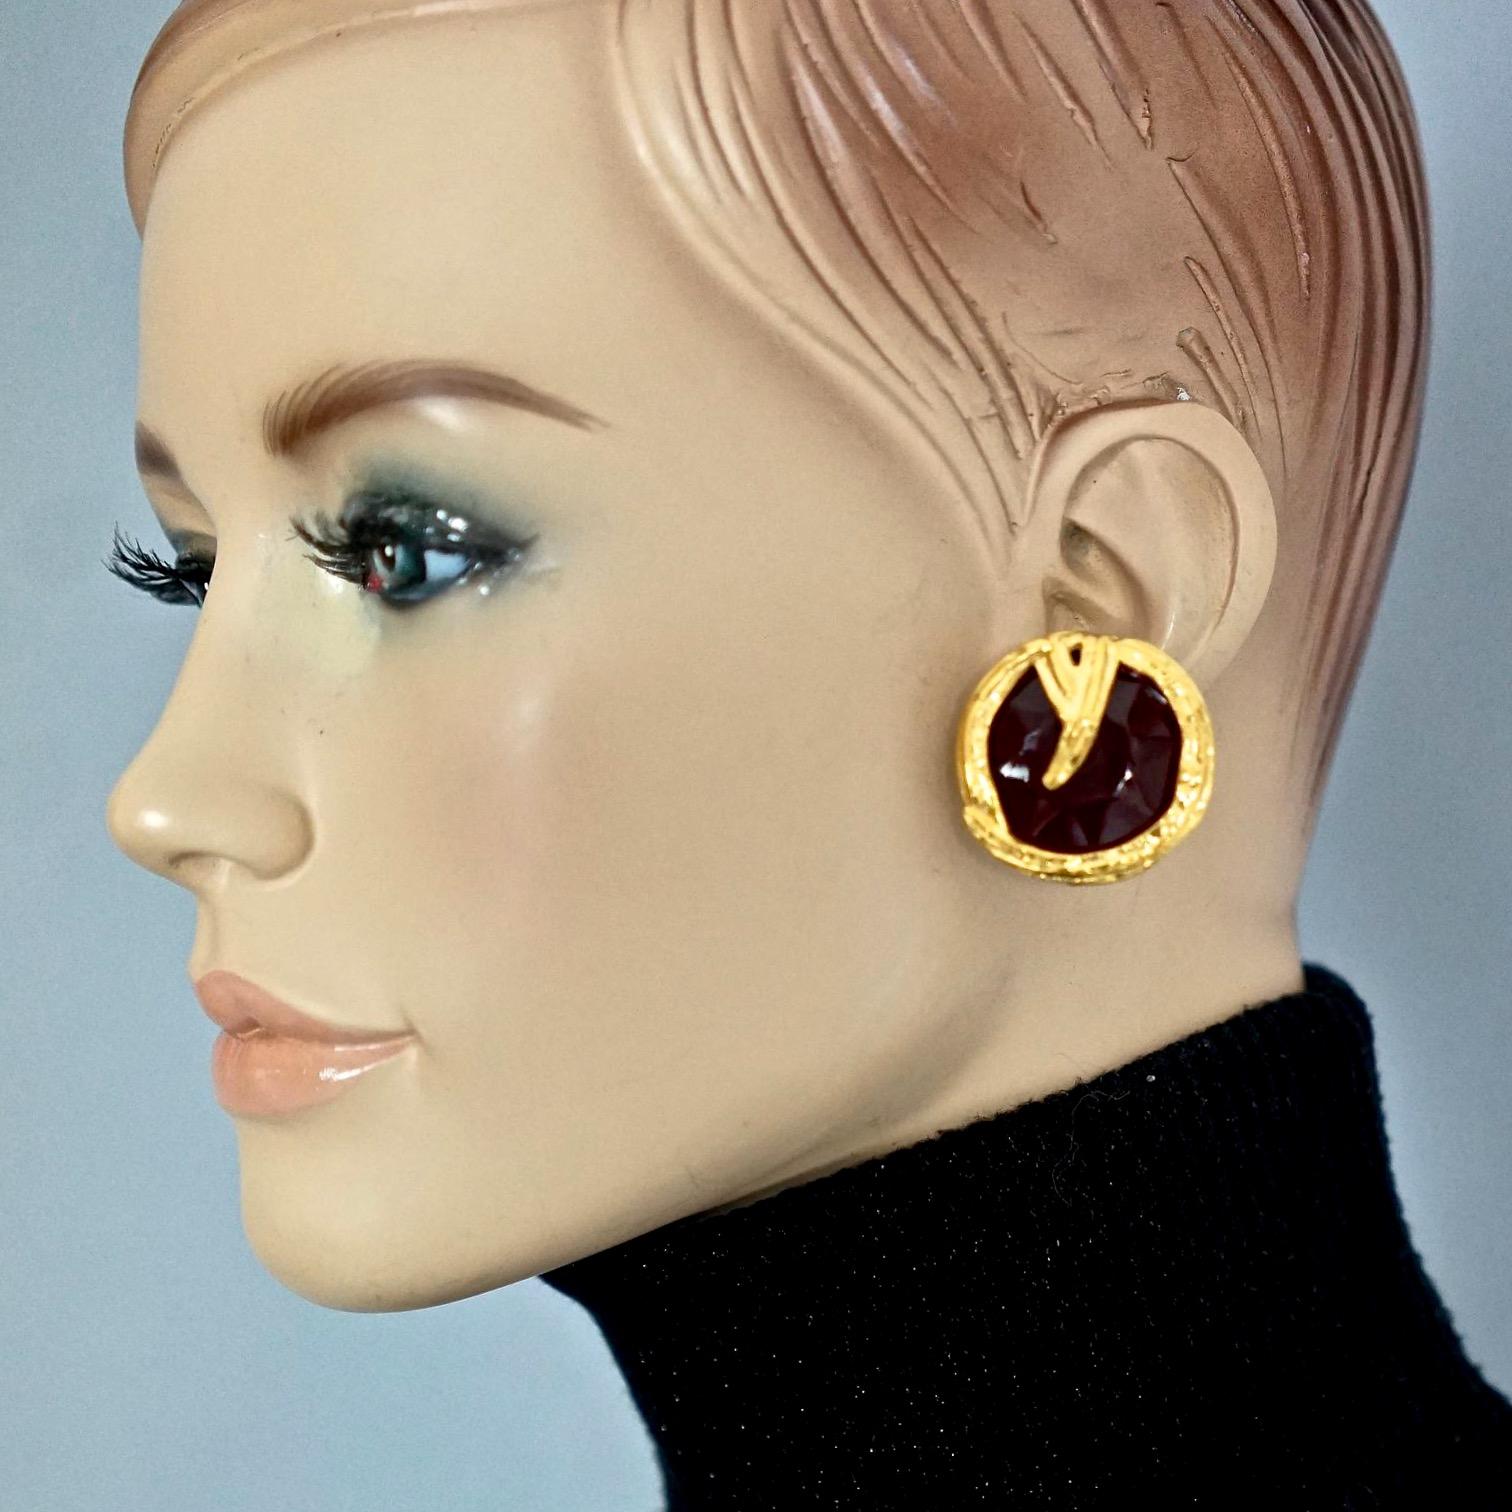 Vintage YVES SAINT LAURENT Ysl Ruby Red Faceted Gilt Earrings

Measurements:
Height: 1.25 inches (3.2 cm)
Width: 1.25 inches (3.2 cm)
Weight per Earring: 18 grams

Features:
- 100% Authentic YVES SAINT LAURENT.
- Raised faceted ruby red resin.
- 